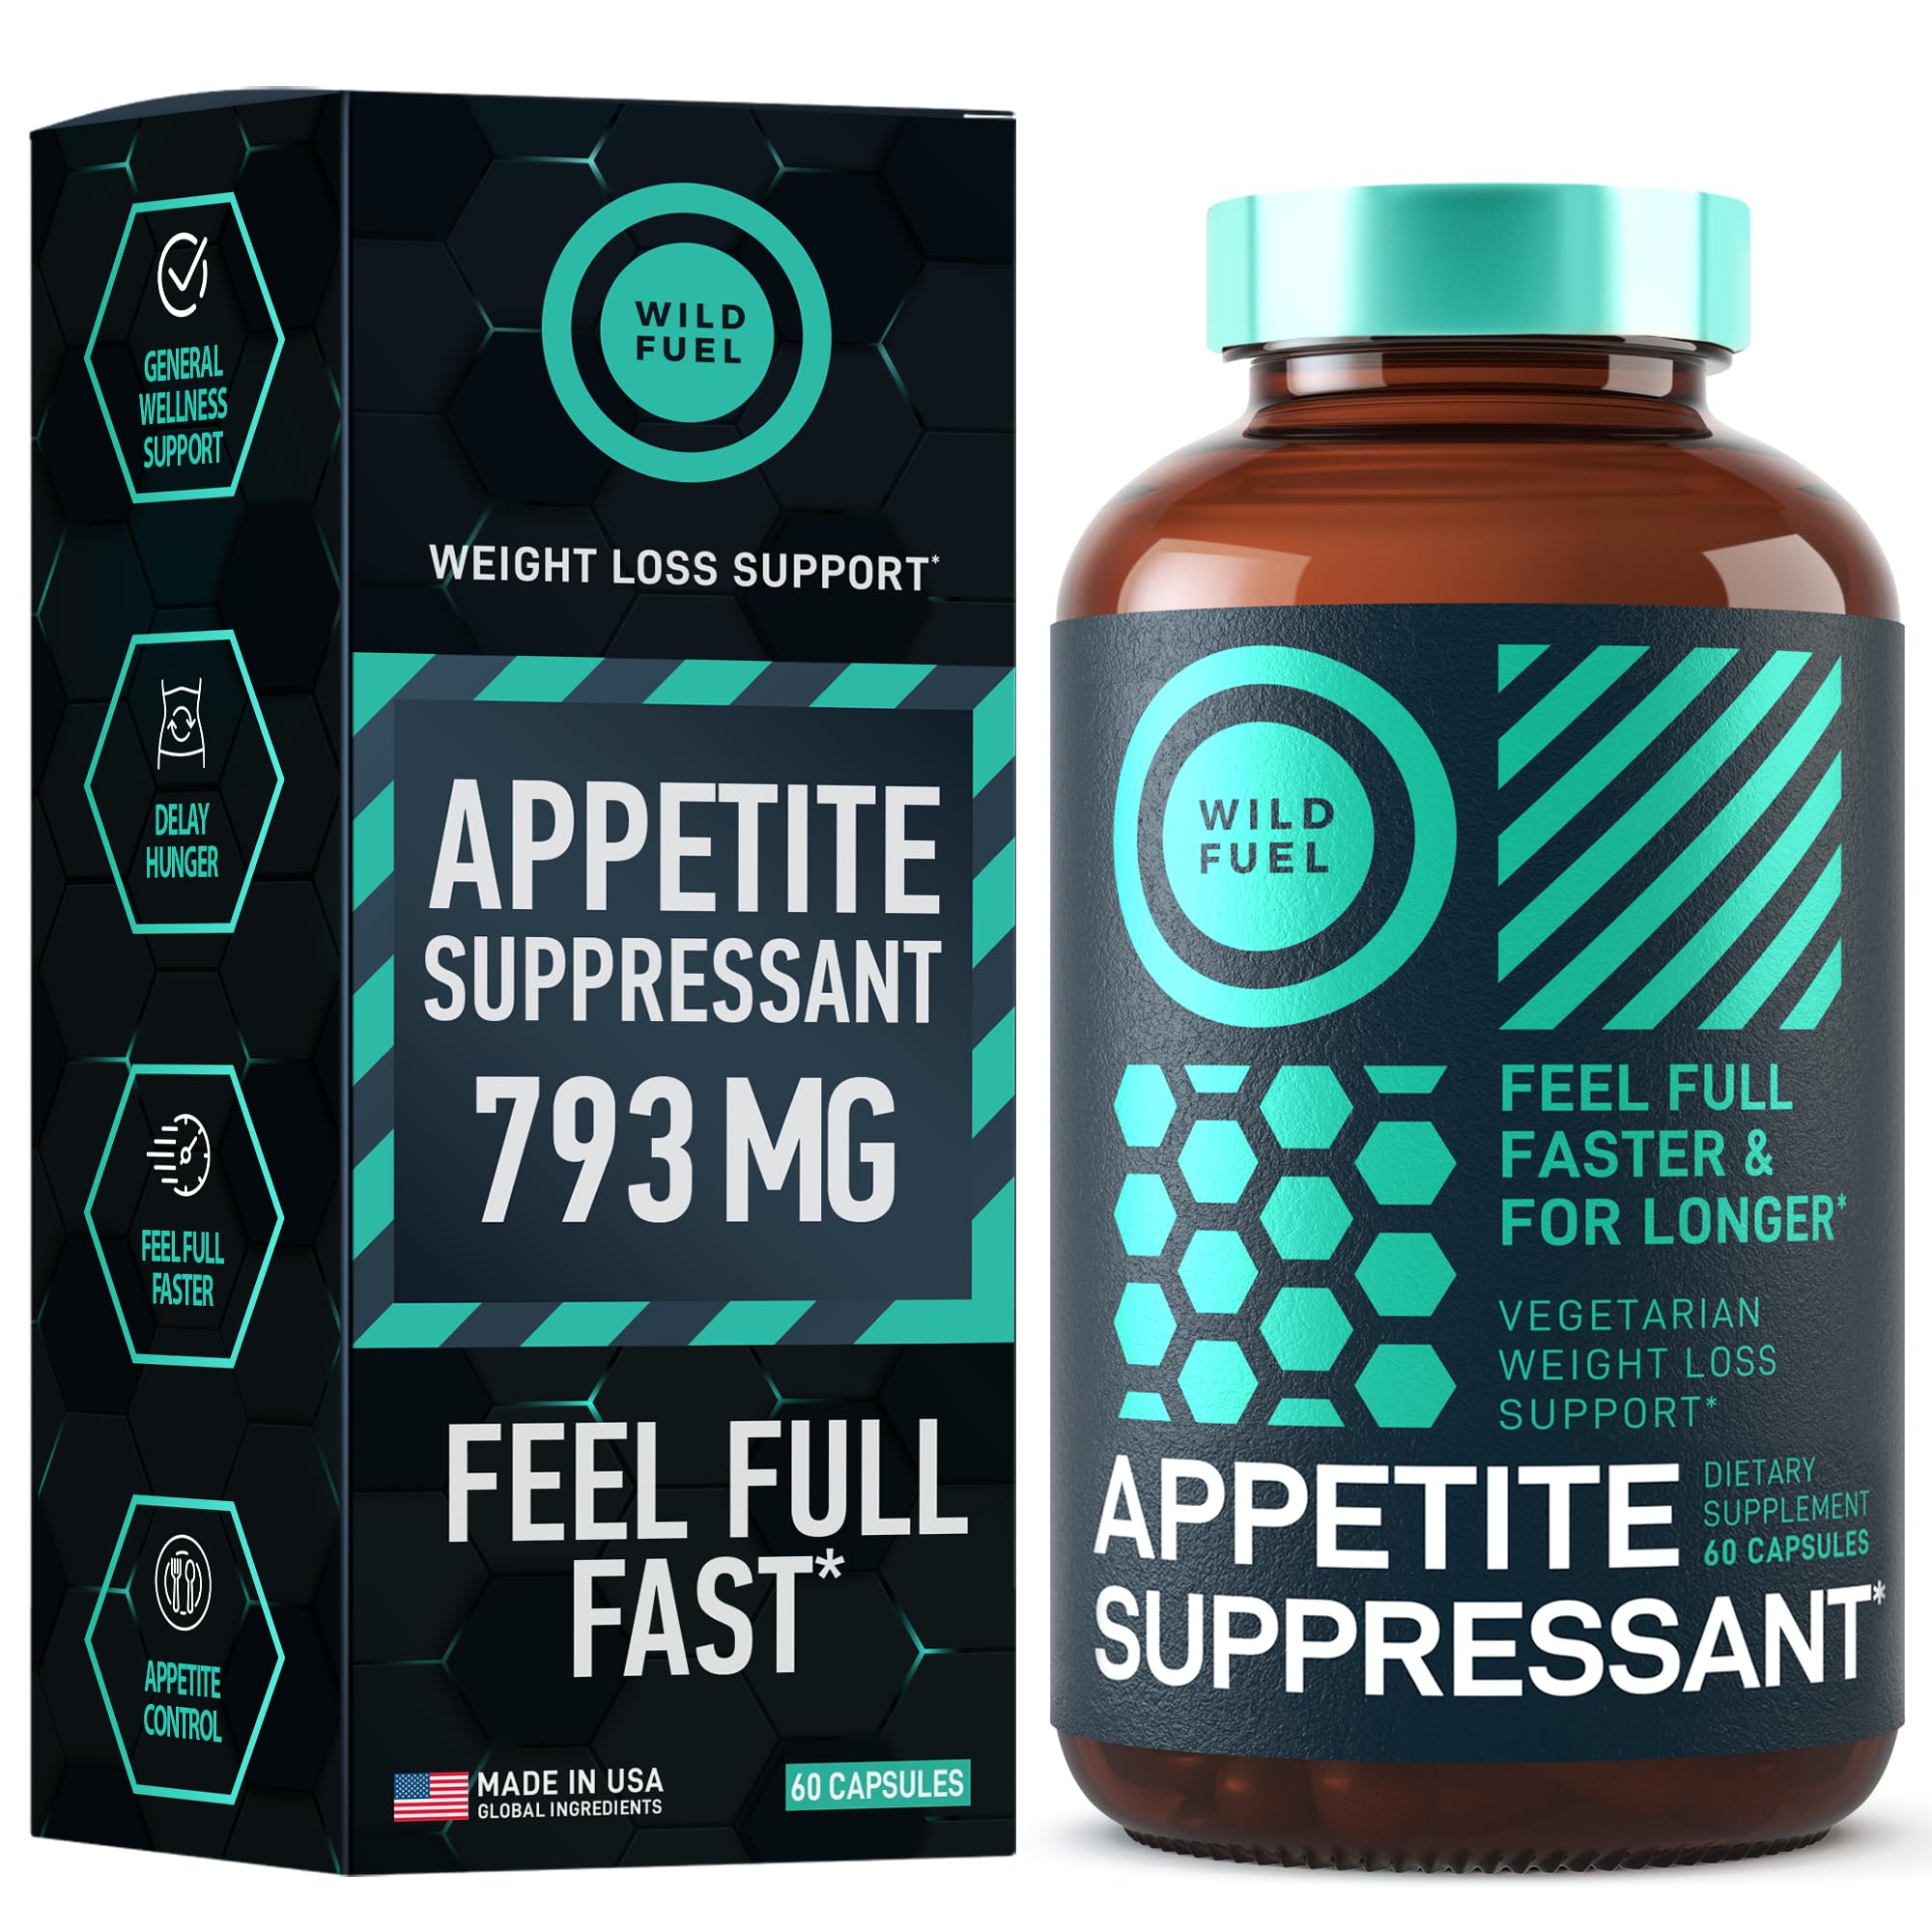 If you're struggling with weight loss or simply trying to maintain a healthy diet, managing your appetite can be a challenging task. Luckily, there are over-the-counter appetite suppressants available that can help curb cravings and make it easier to stick to your eating plan. In this article, we will review 12 popular appetite suppressants and discuss their effectiveness and potential side effects.